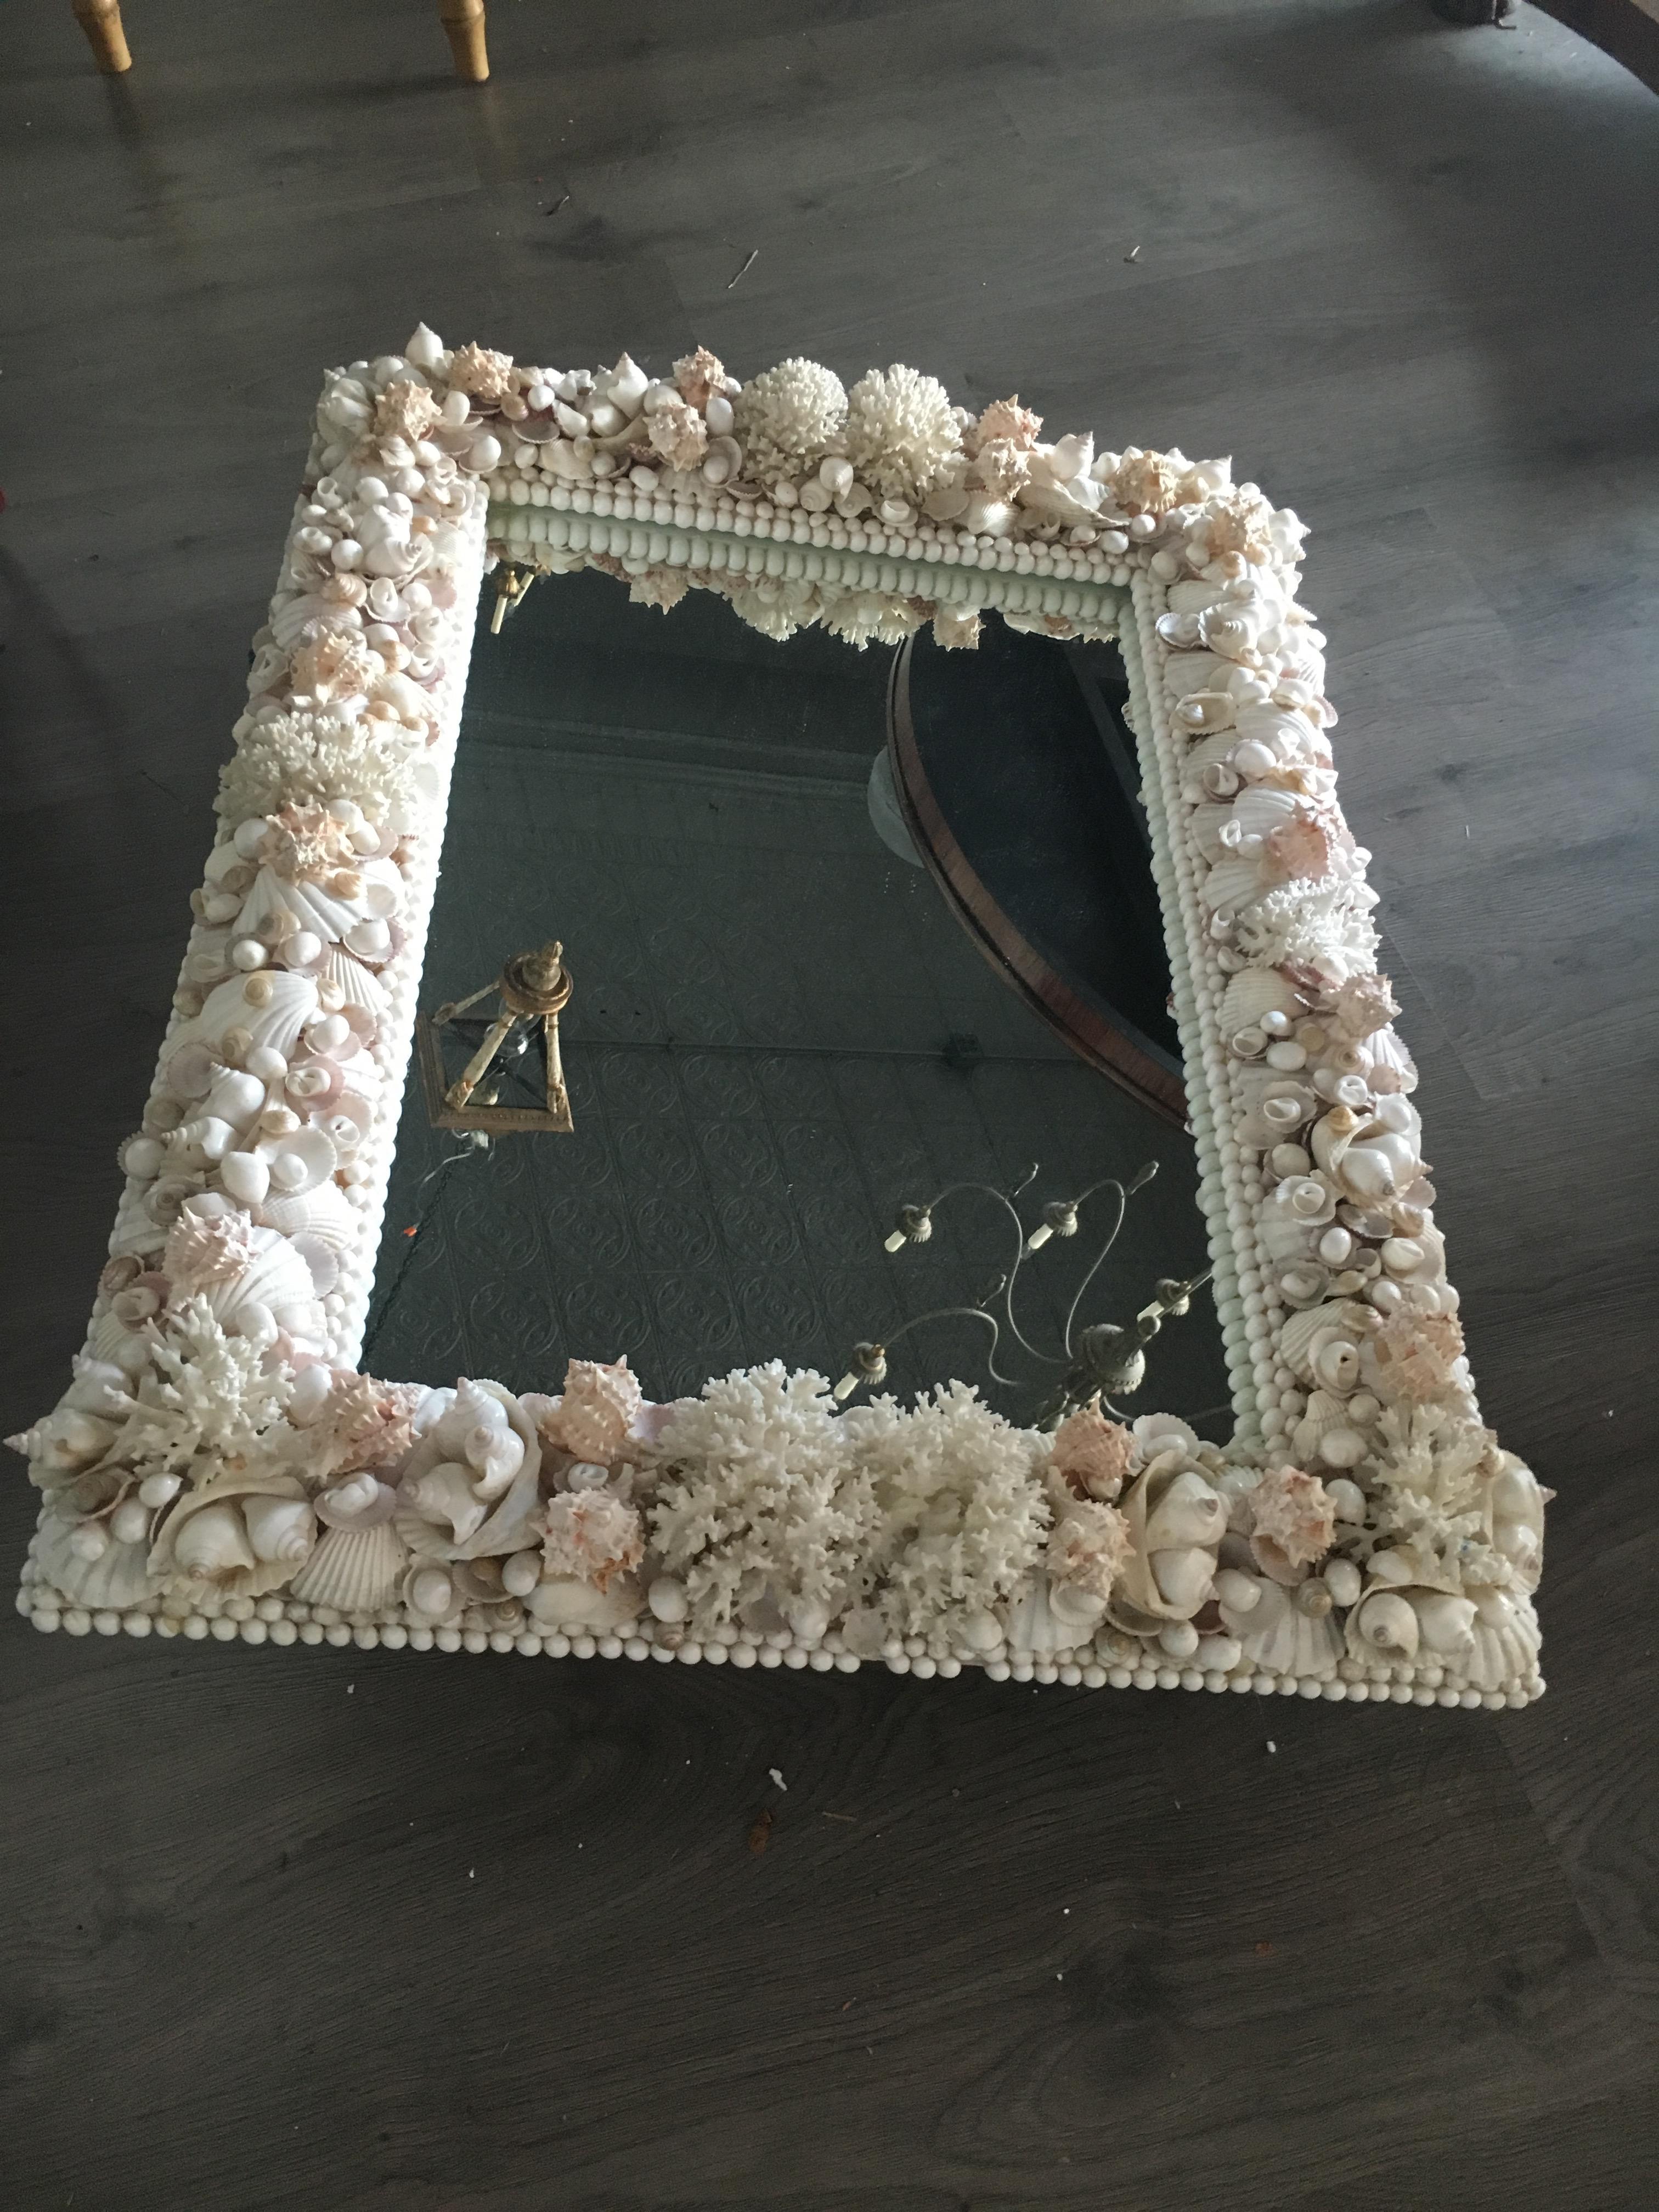 A Grotto style shell decorated mirror. Measures: Height 40 x width 30 inches. Great composition and detail.